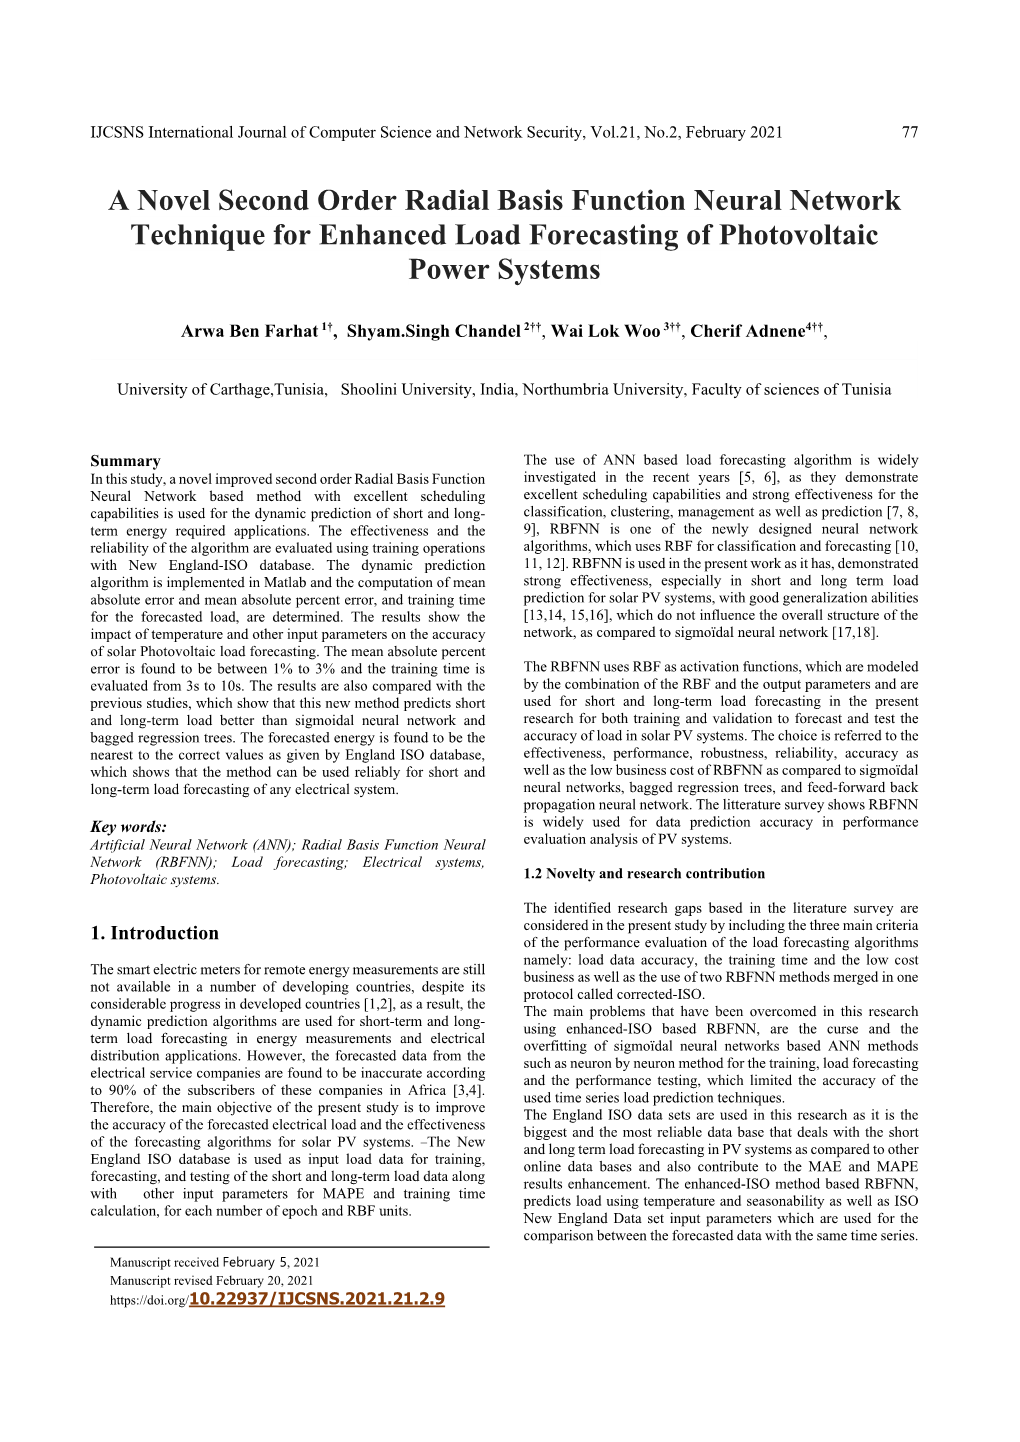 A Novel Second Order Radial Basis Function Neural Network Technique for Enhanced Load Forecasting of Photovoltaic Power Systems